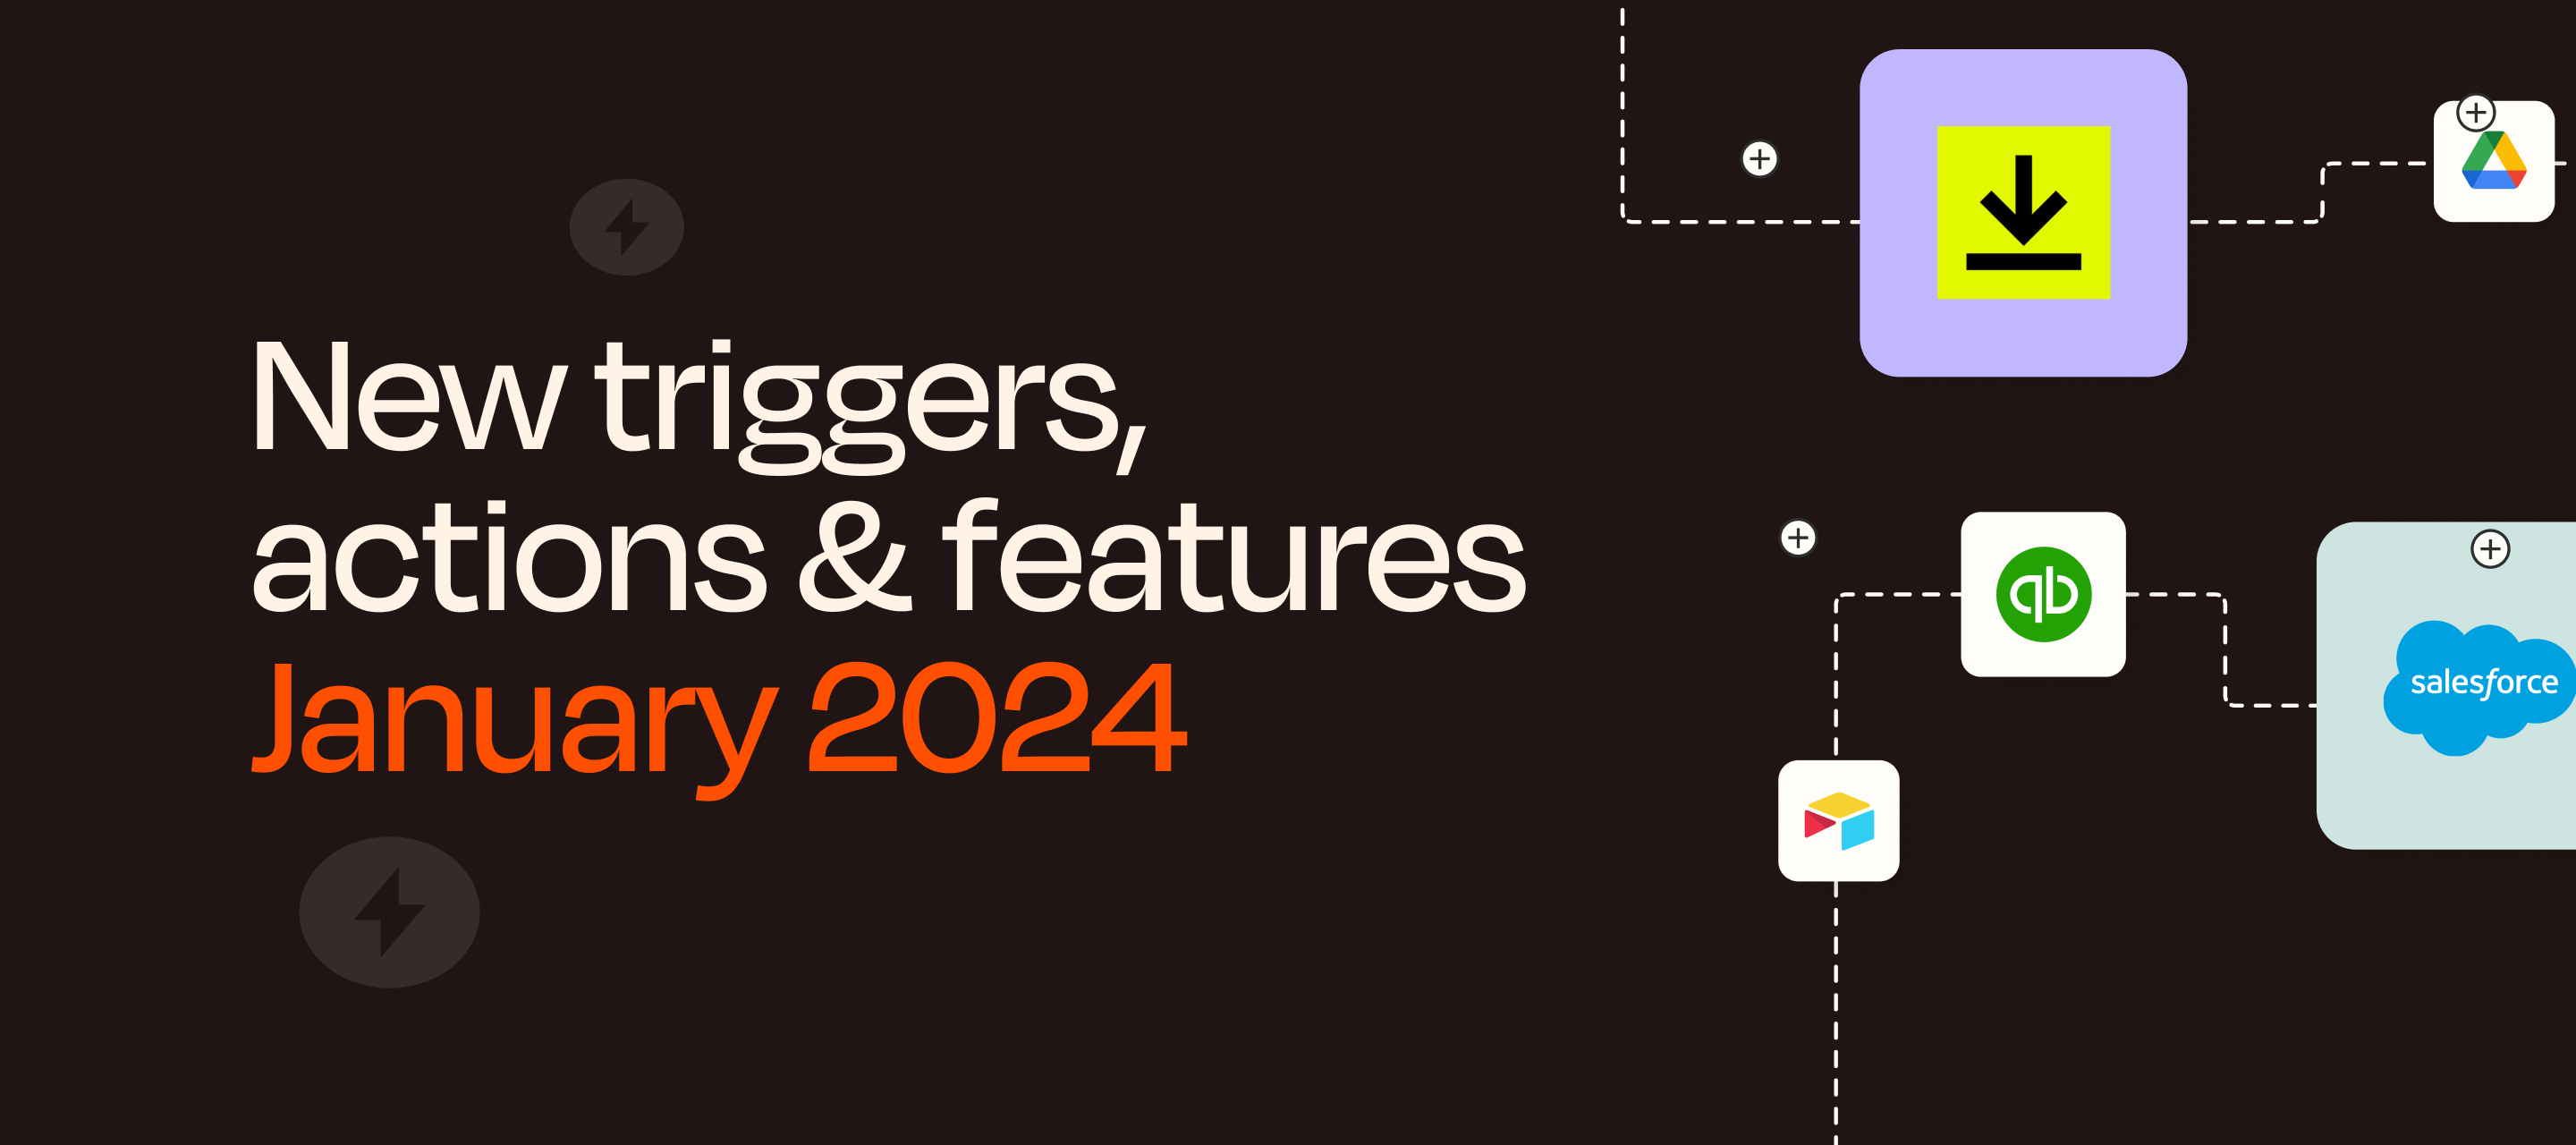 New triggers, actions & features - January 2024